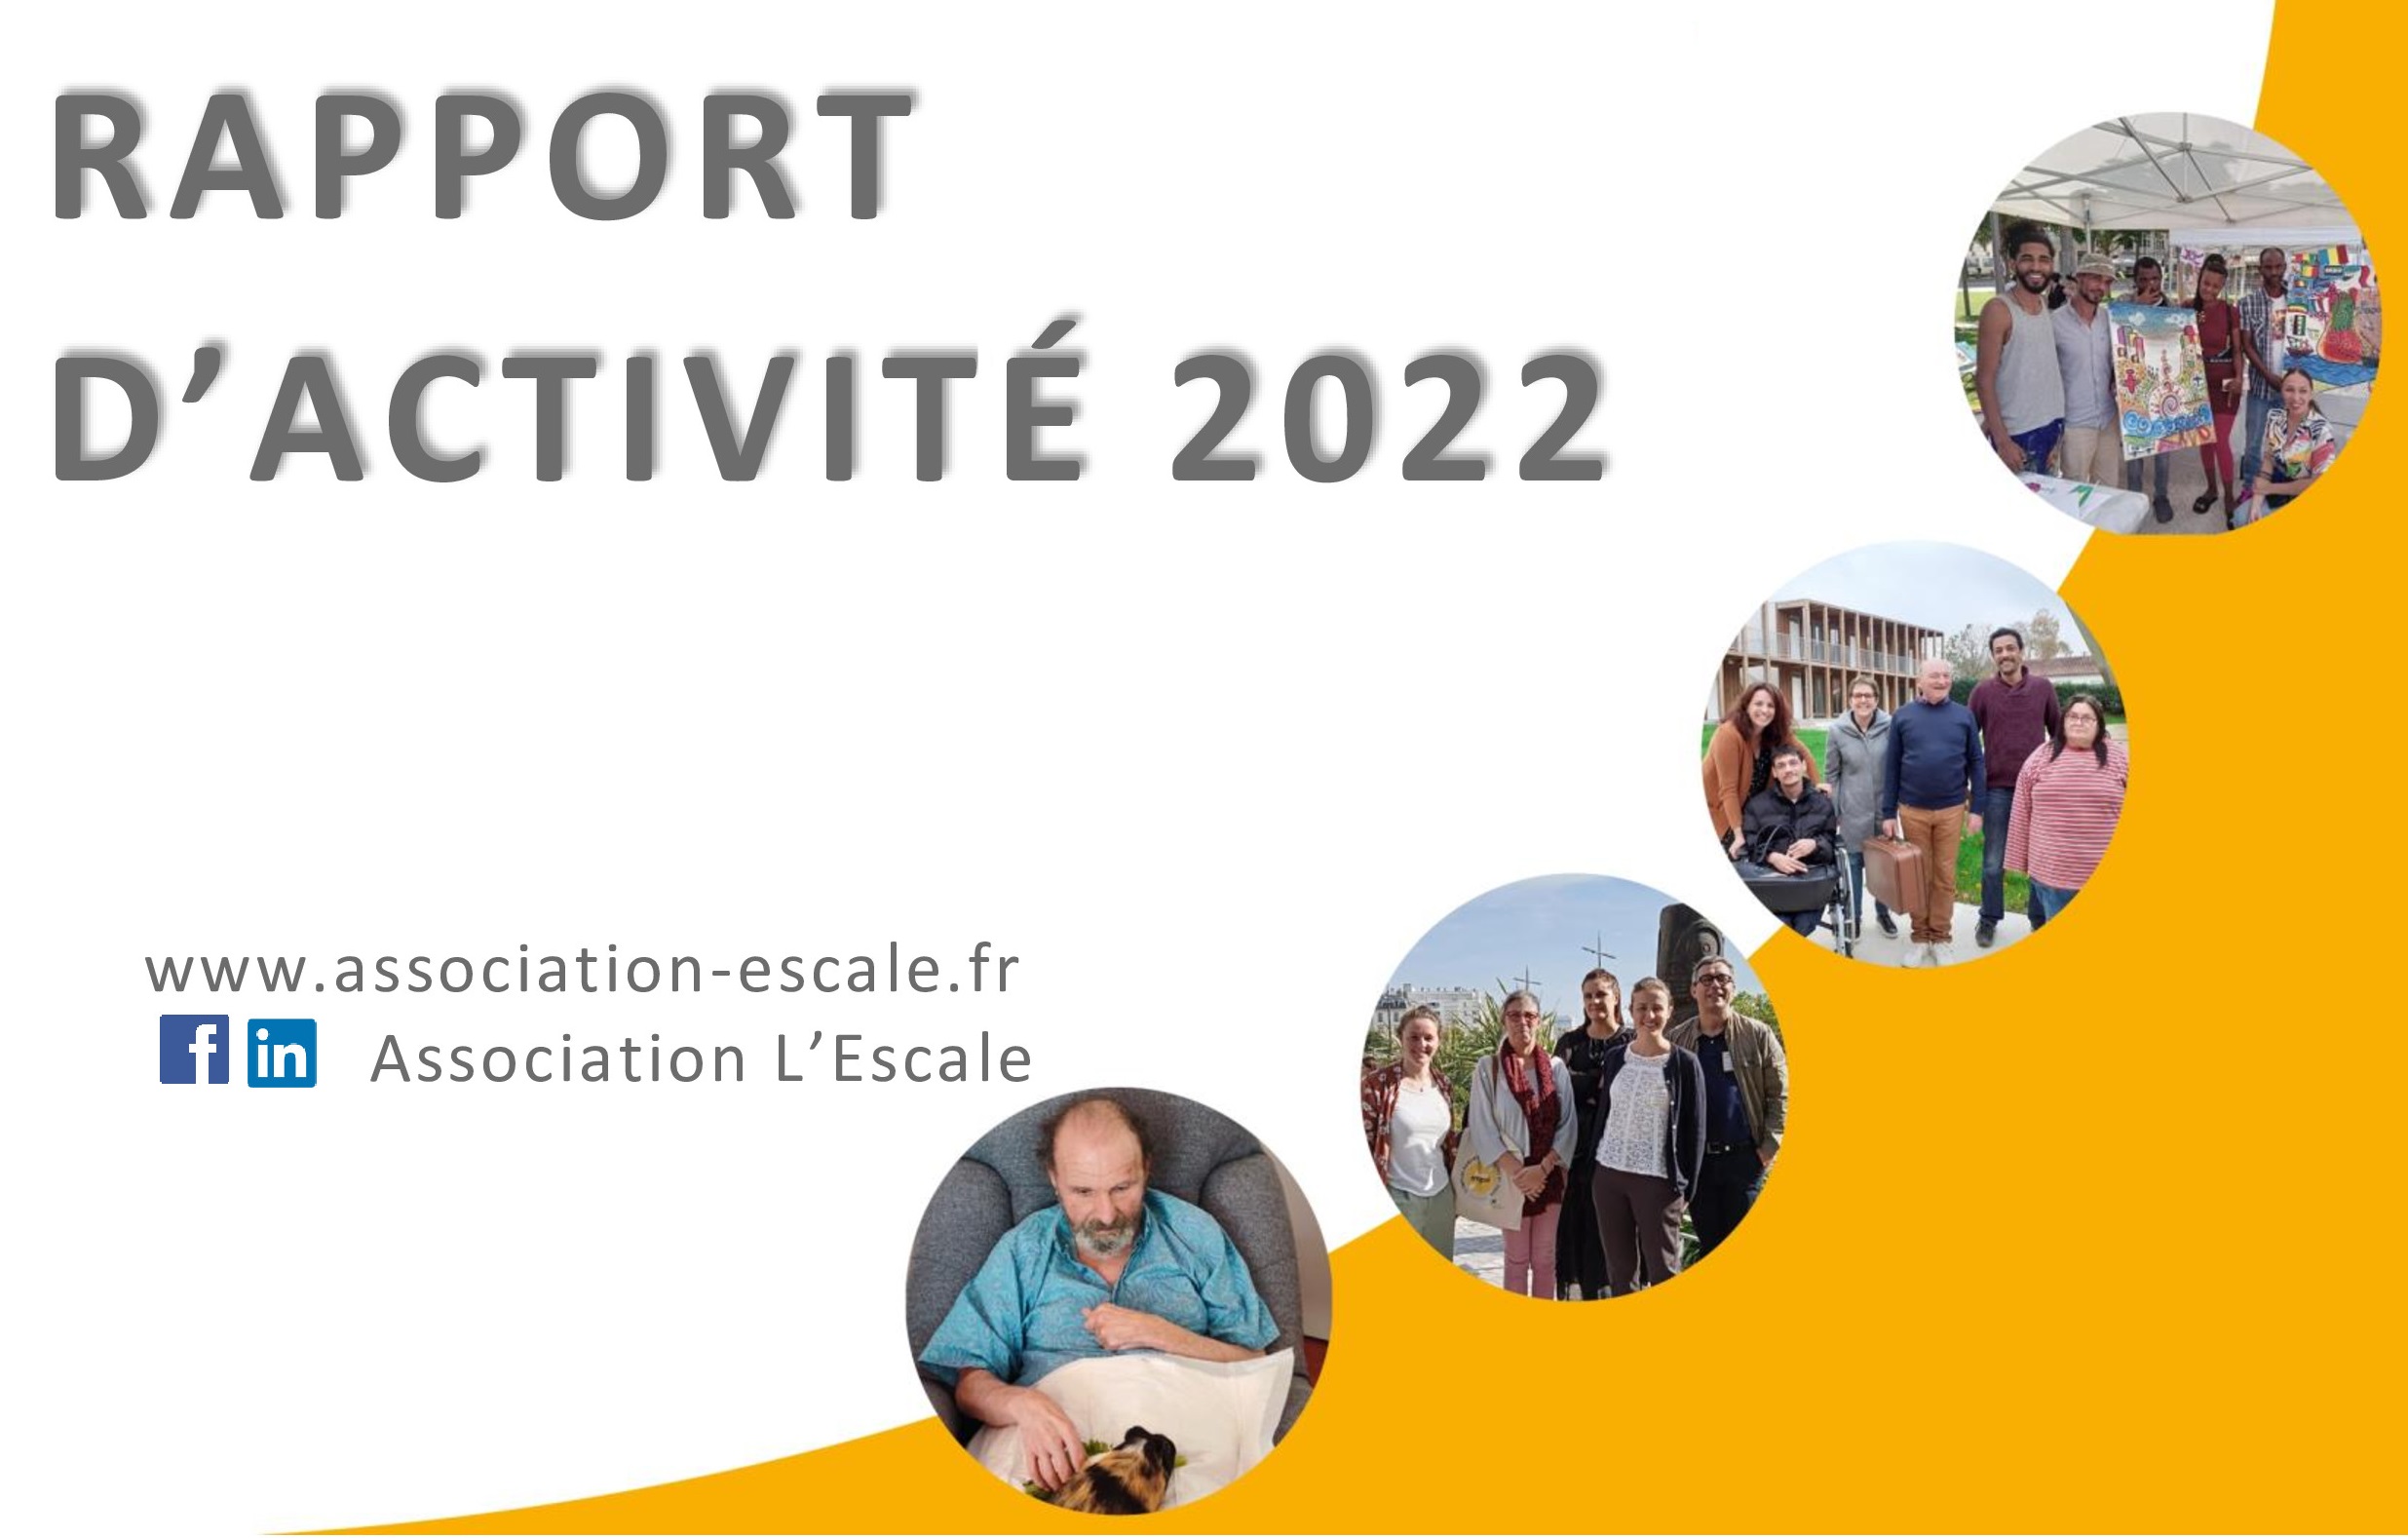 You are currently viewing RAPPORT D’ACTIVITÉ 2022